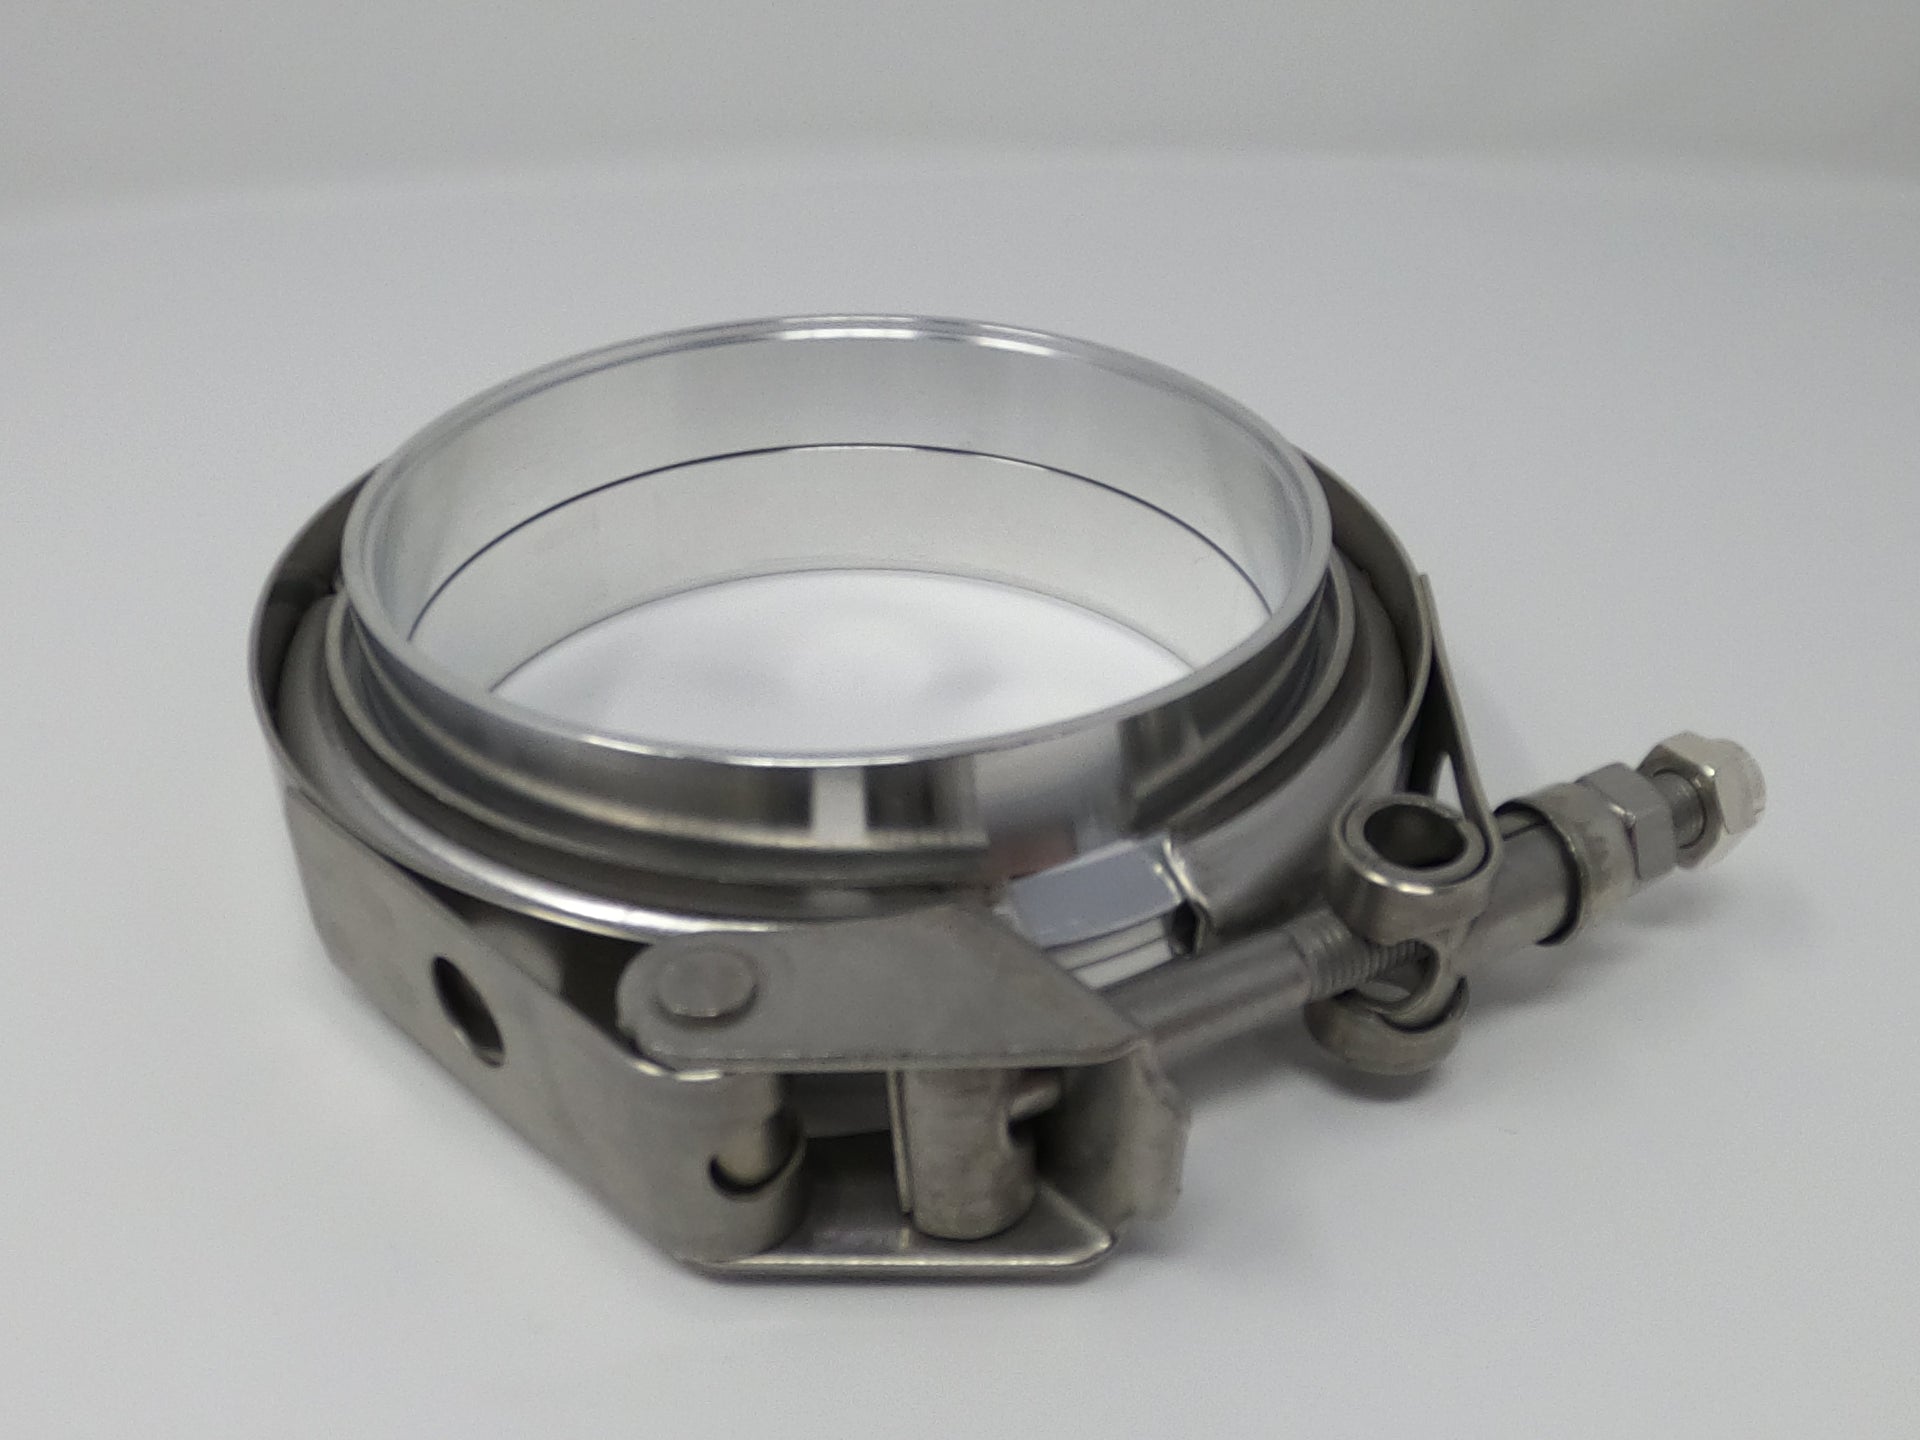 4.0" Aluminum V-Band Flange Assembly with Clamp - Black Sheep Industries Inc.